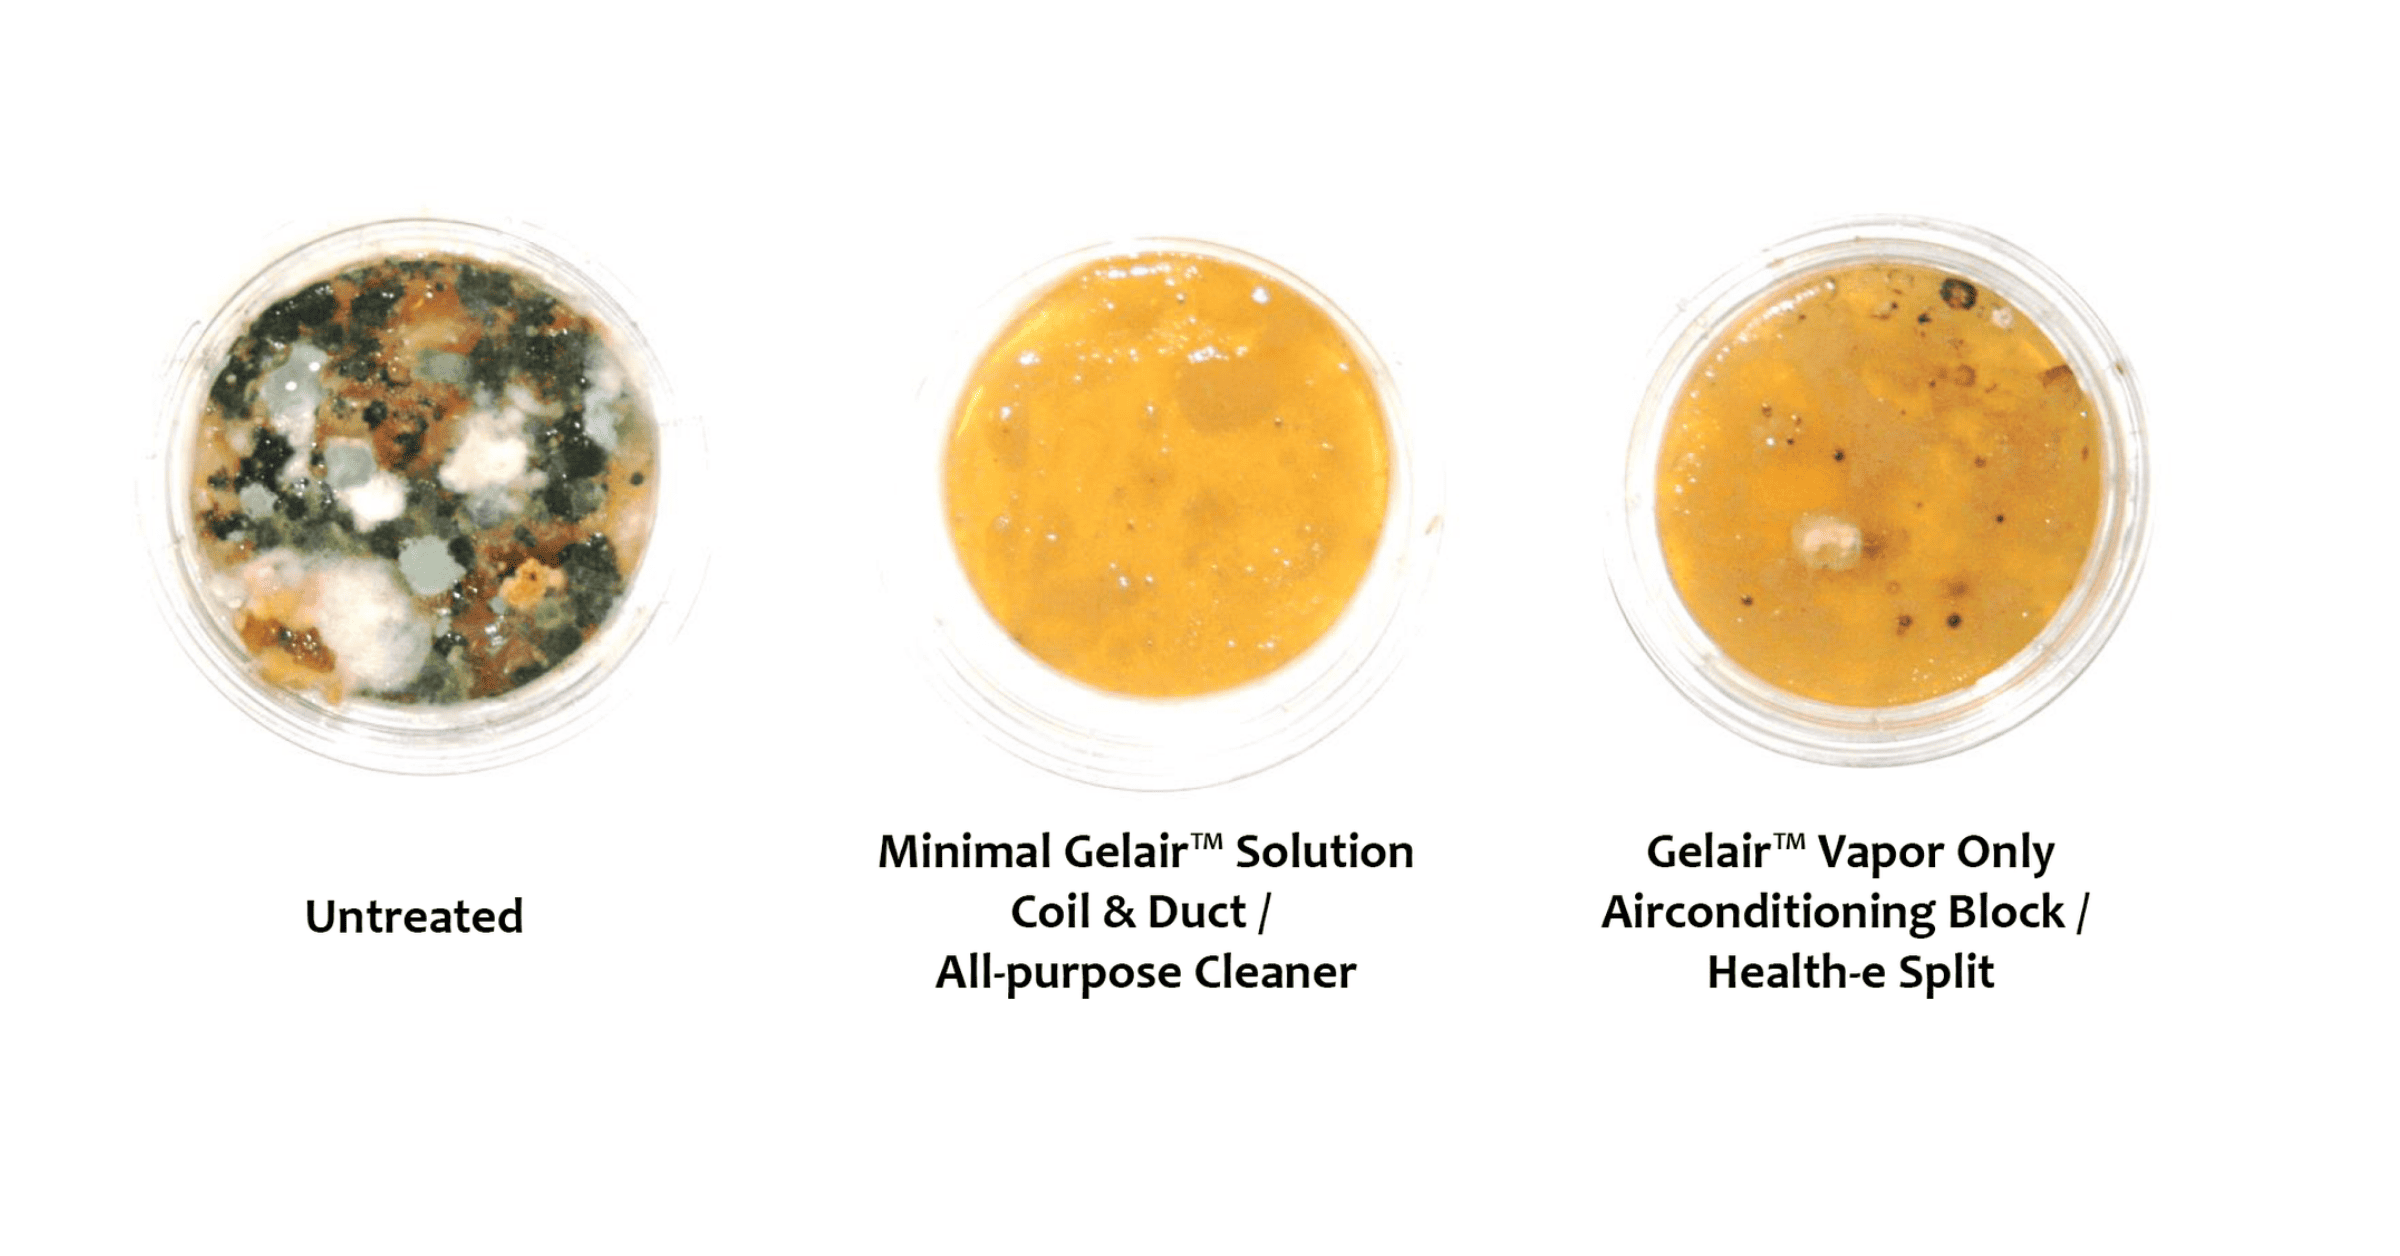  Isn't it amazing how powerful Gelair is? Read on to find out more!